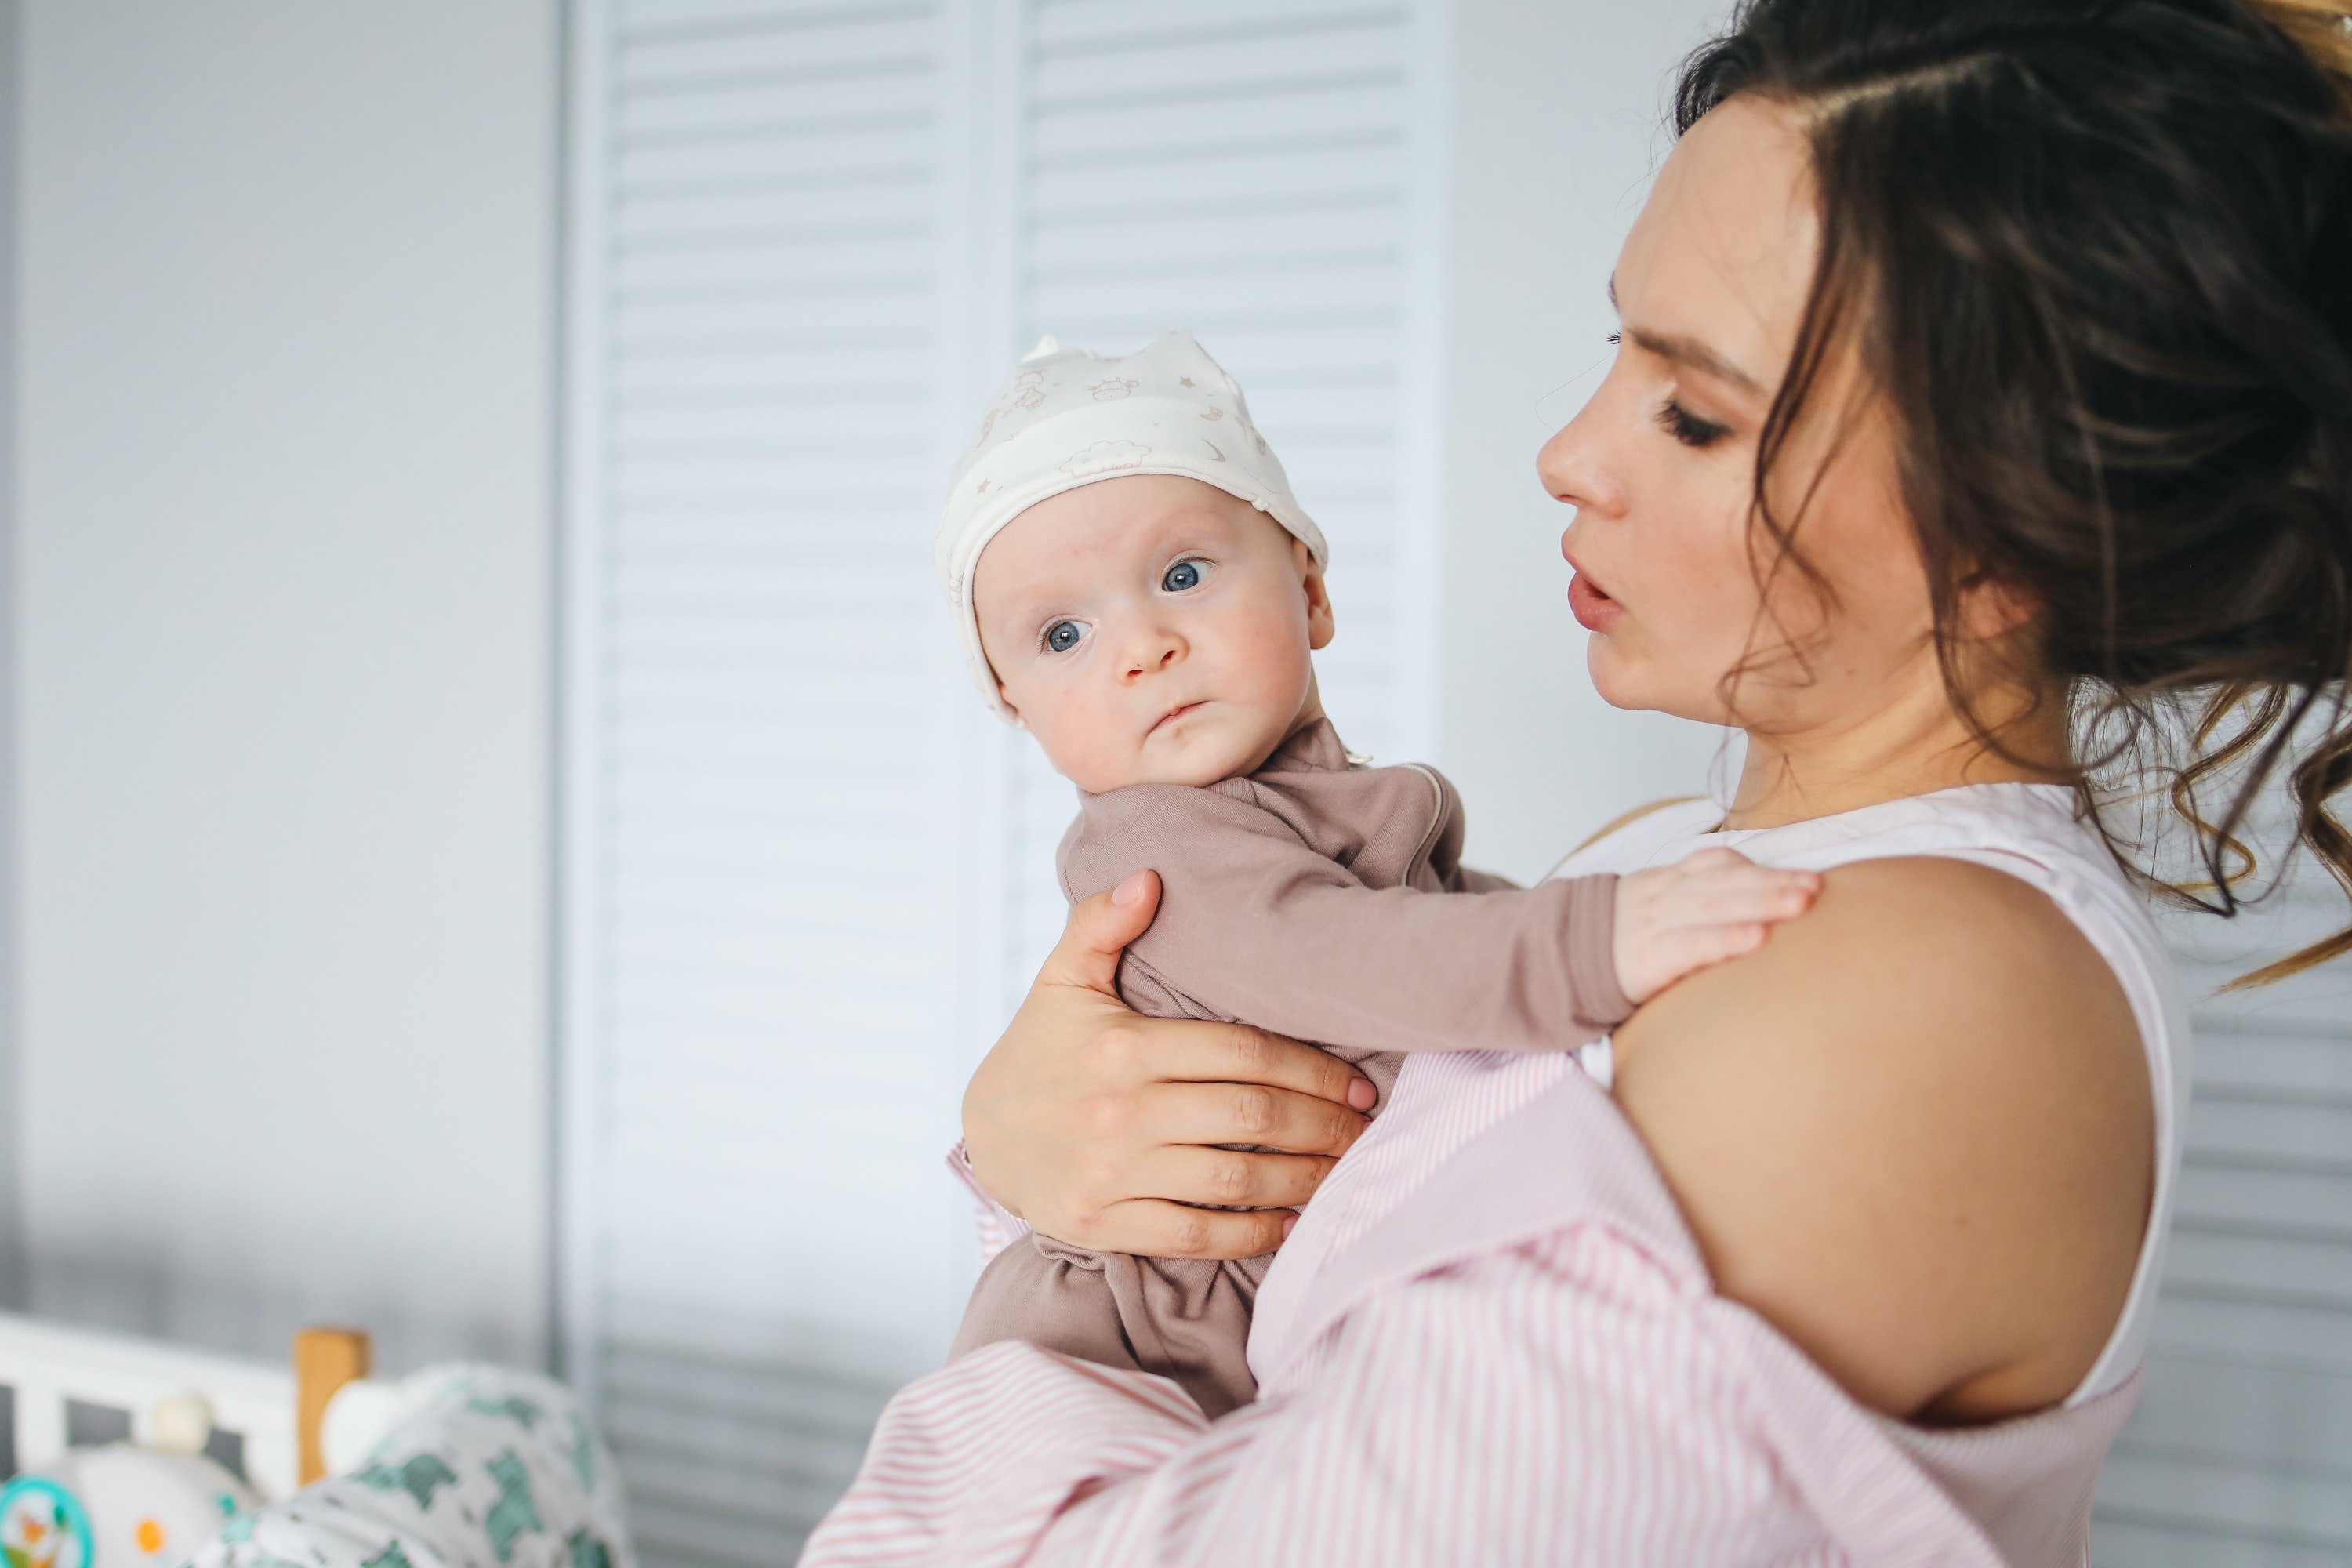 Caroline noticed the baby was running a temperature | Photo: Pexels